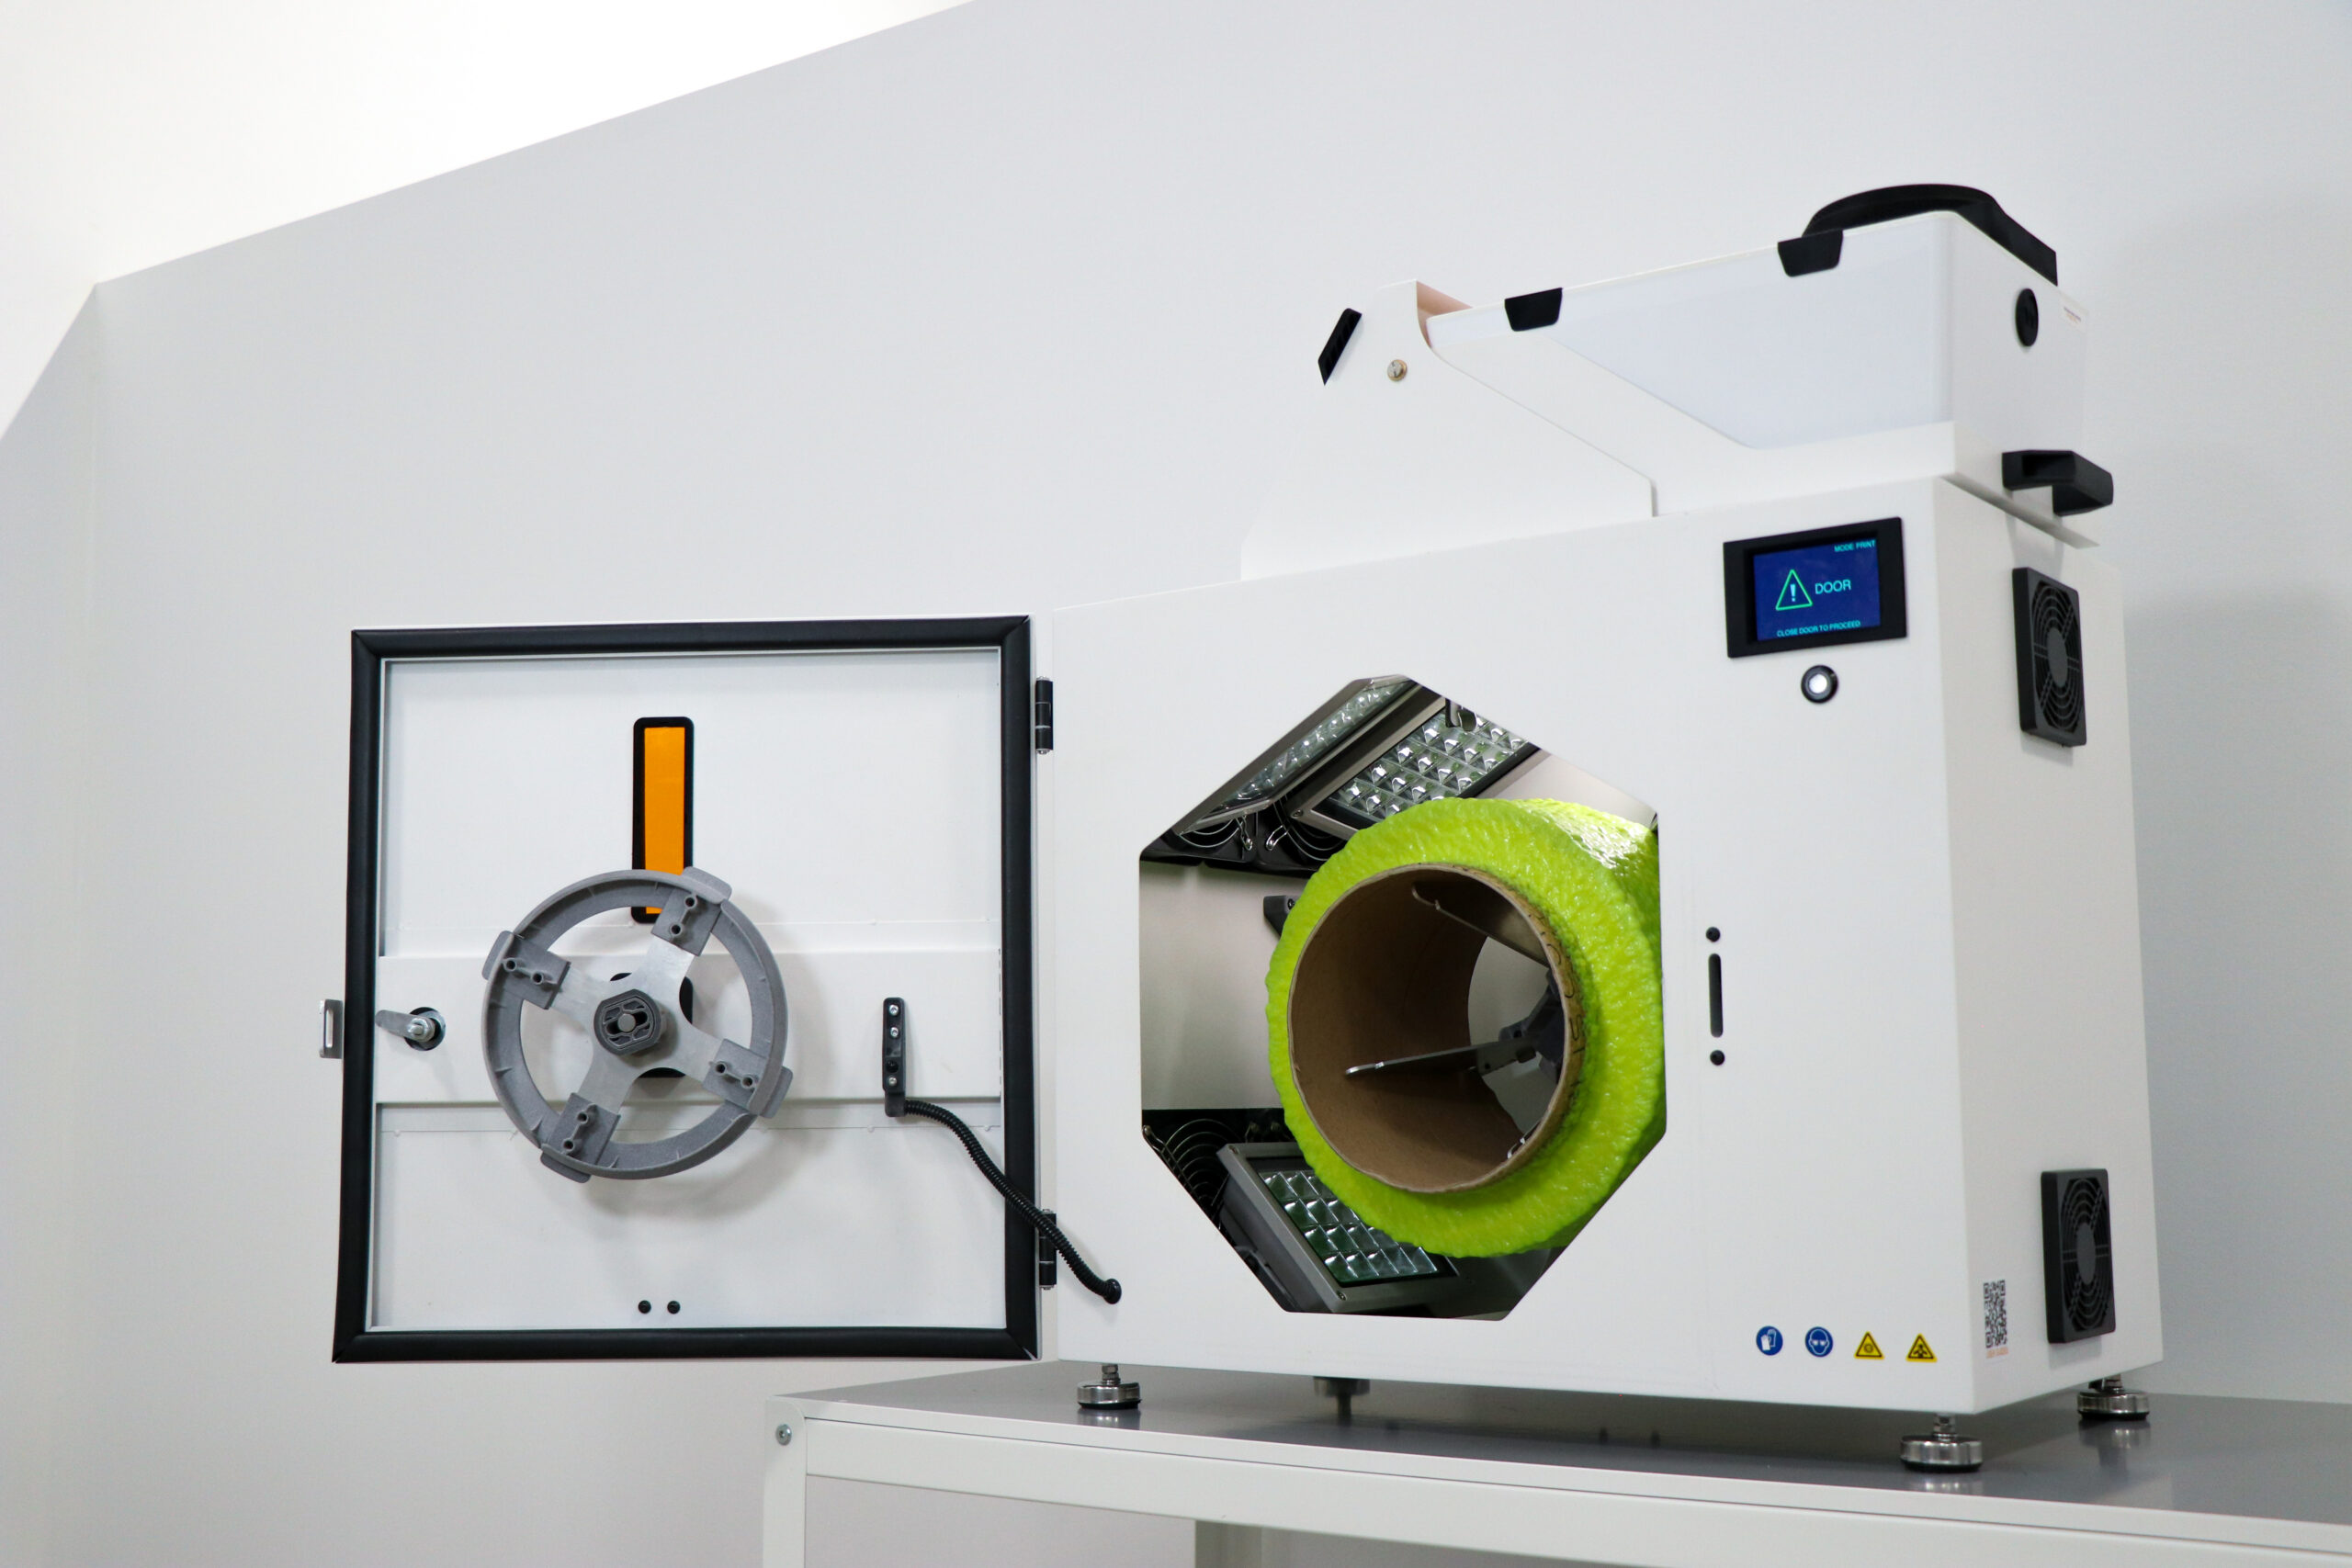 Onulis introduces new WRAPCure machine with “best-in-class” DLP resin-curing  capabilities - 3D Printing Industry